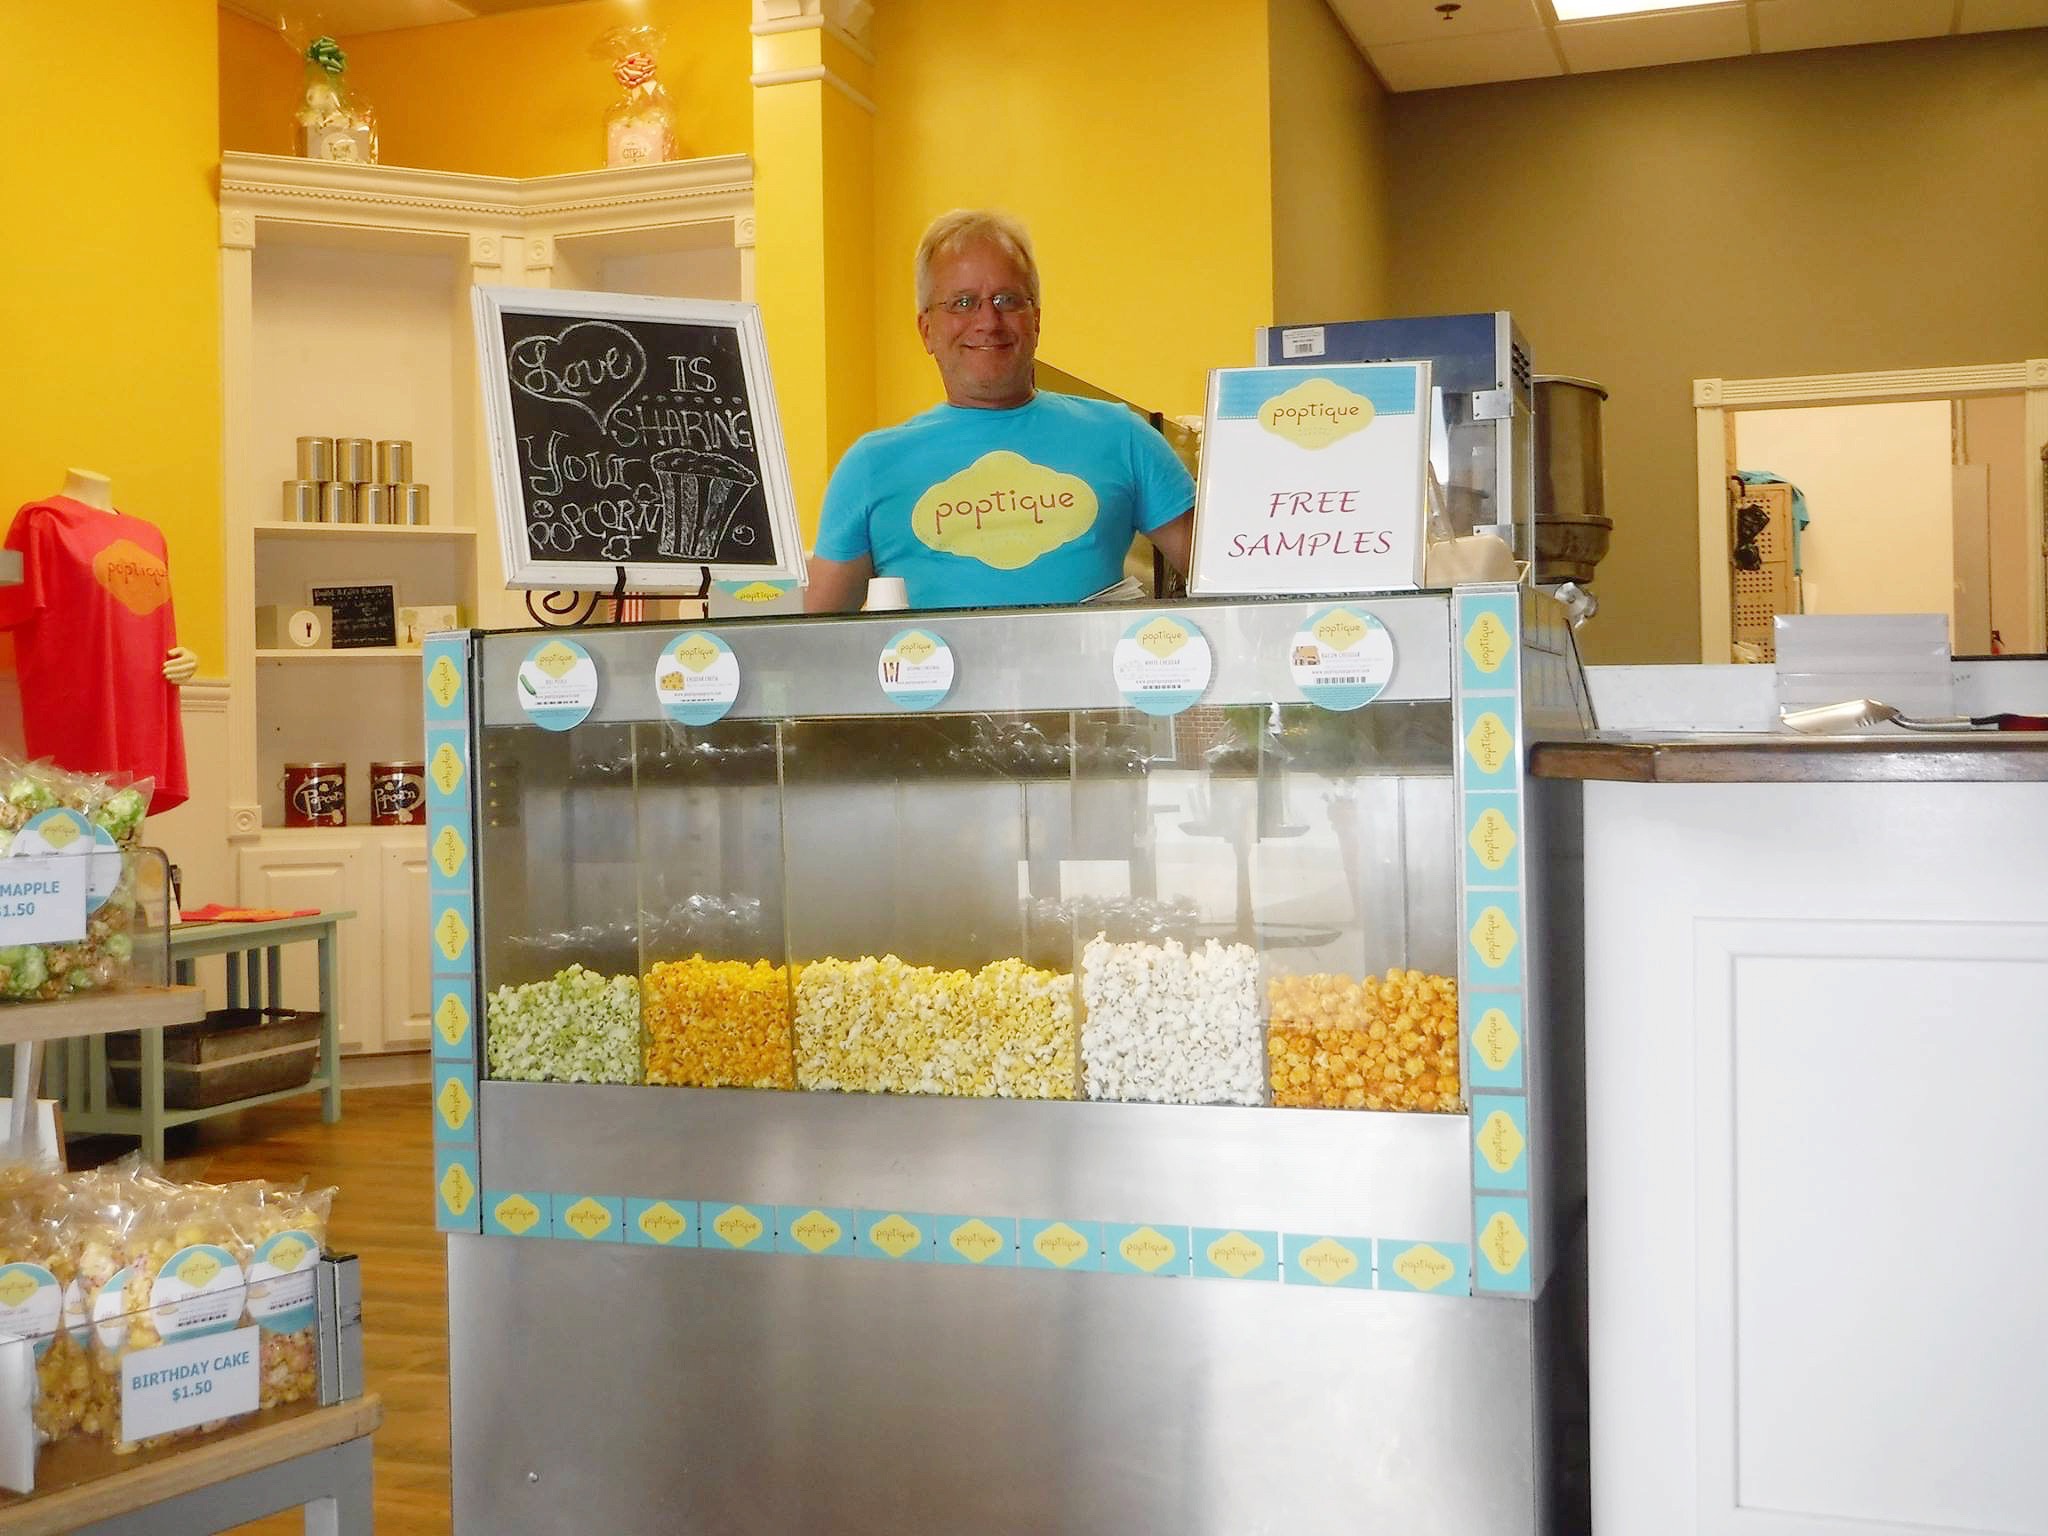 Gary Hively is the owner of Poptique Gourmet Popcorn.